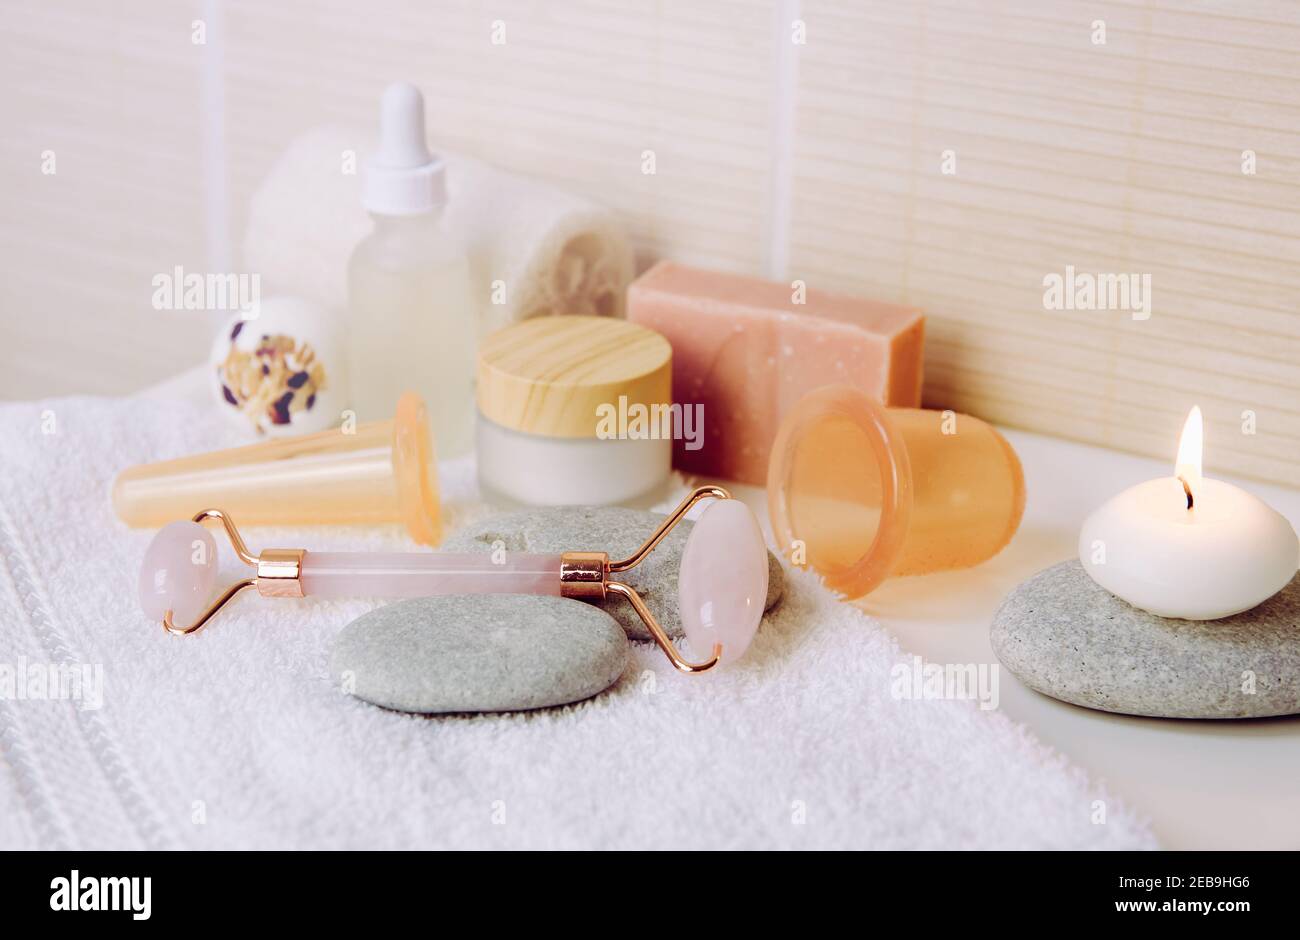 Cozy home spa and self care concept. Various spa tools in home bathroom: rose quartz face rolling tool, facial and body silicone cupping tools. Stock Photo